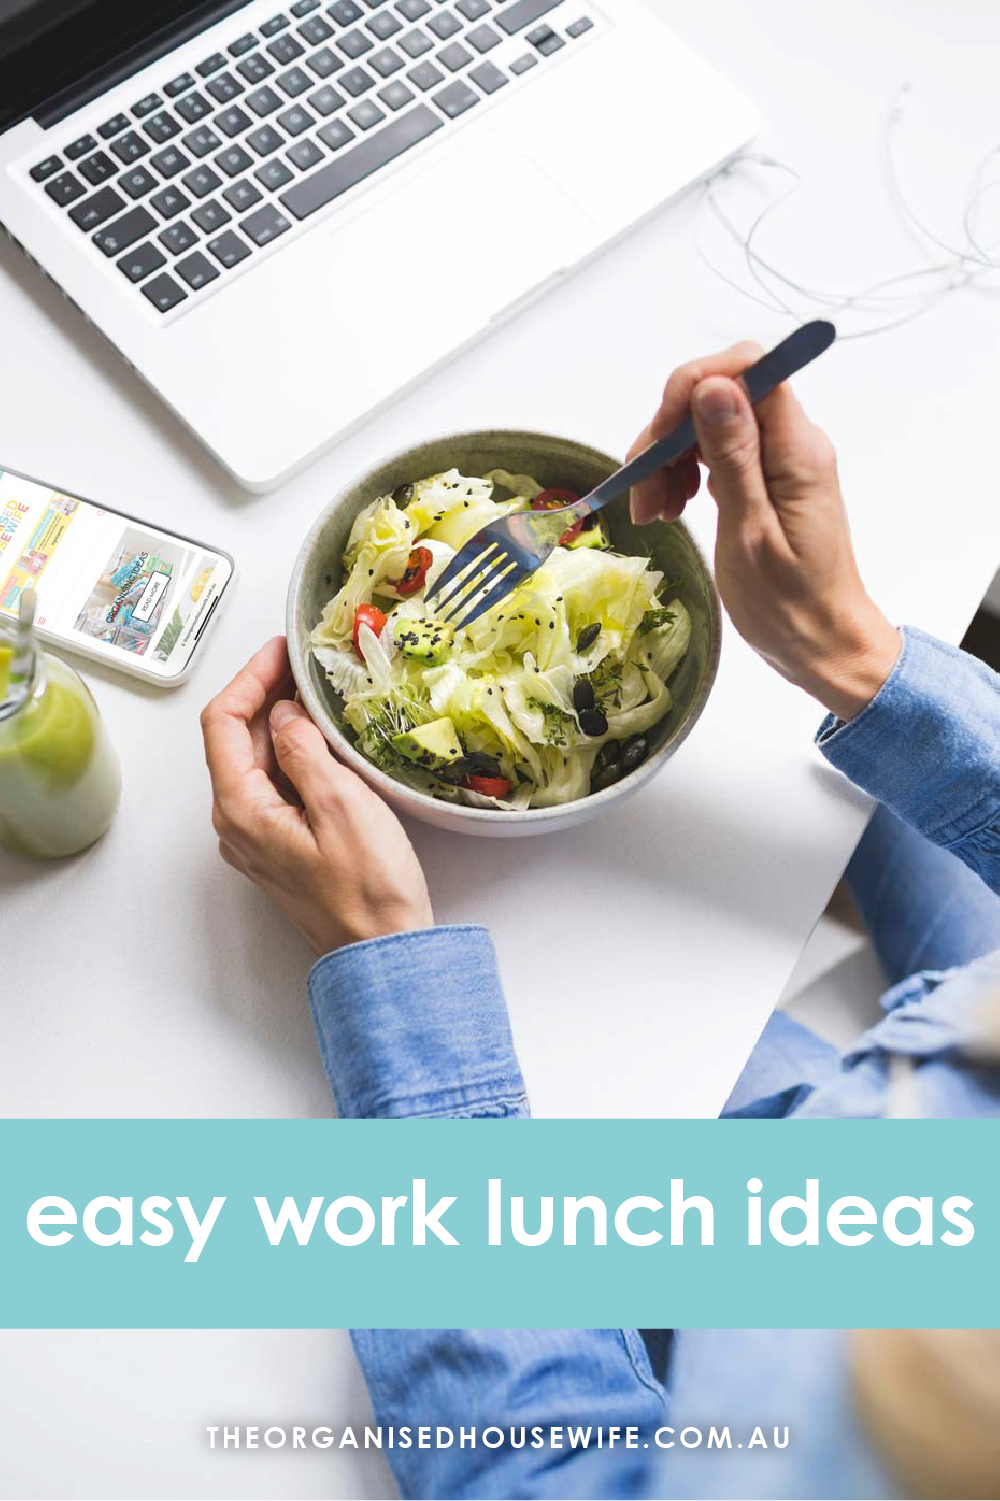 Easy work lunch ideas - The Organised Housewife